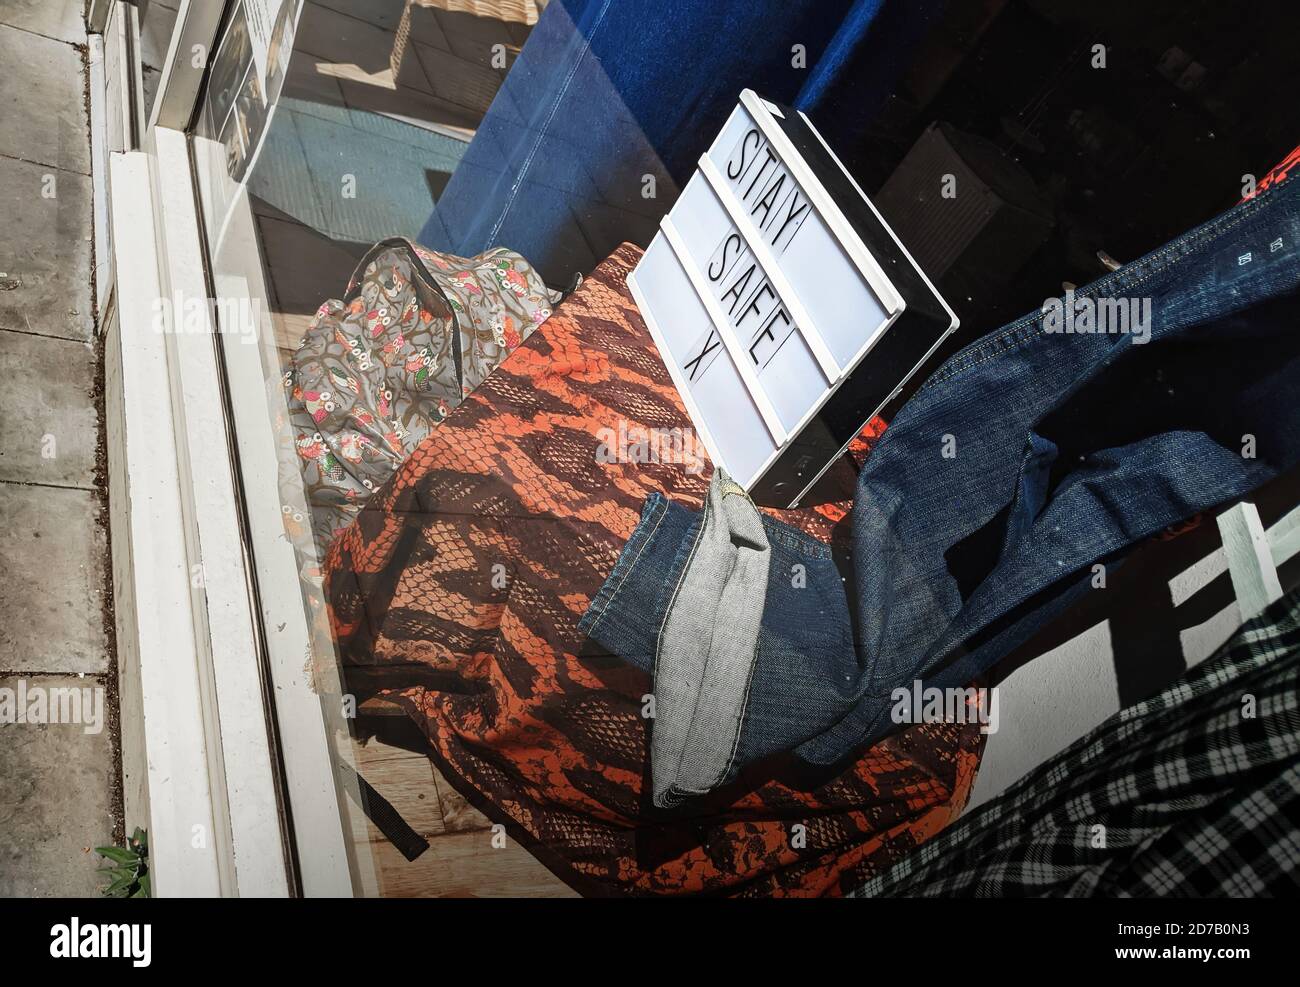 Newark On Trent - 20 May 2020 - View of Stay Safe Sign in Shop Display Window during Covid Lockdown in Newark, UK Stock Photo